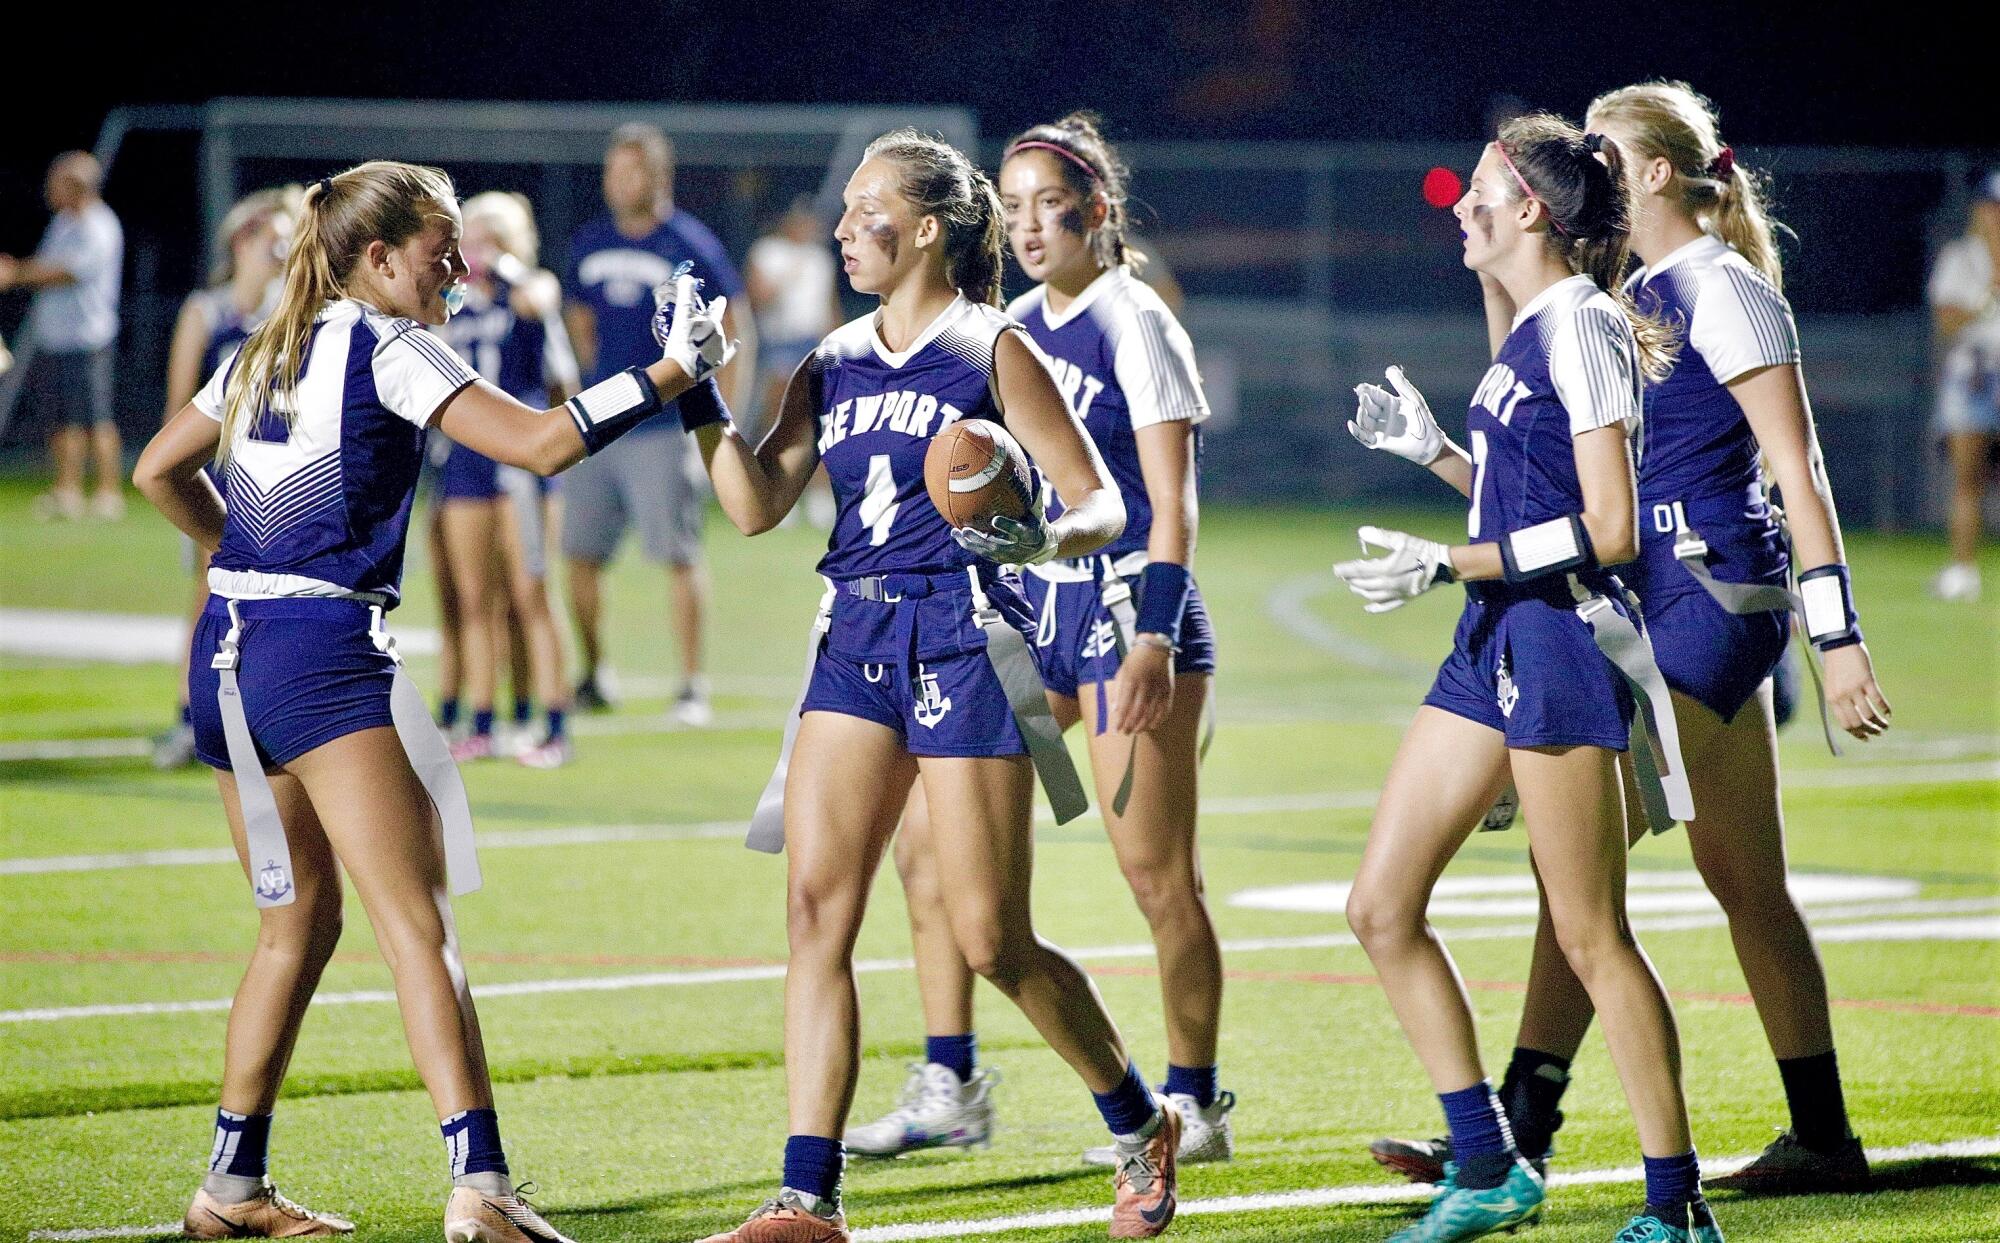 Kate Kubiak is congratulated by Newport Harbor High teammates after scoring a touchdown.